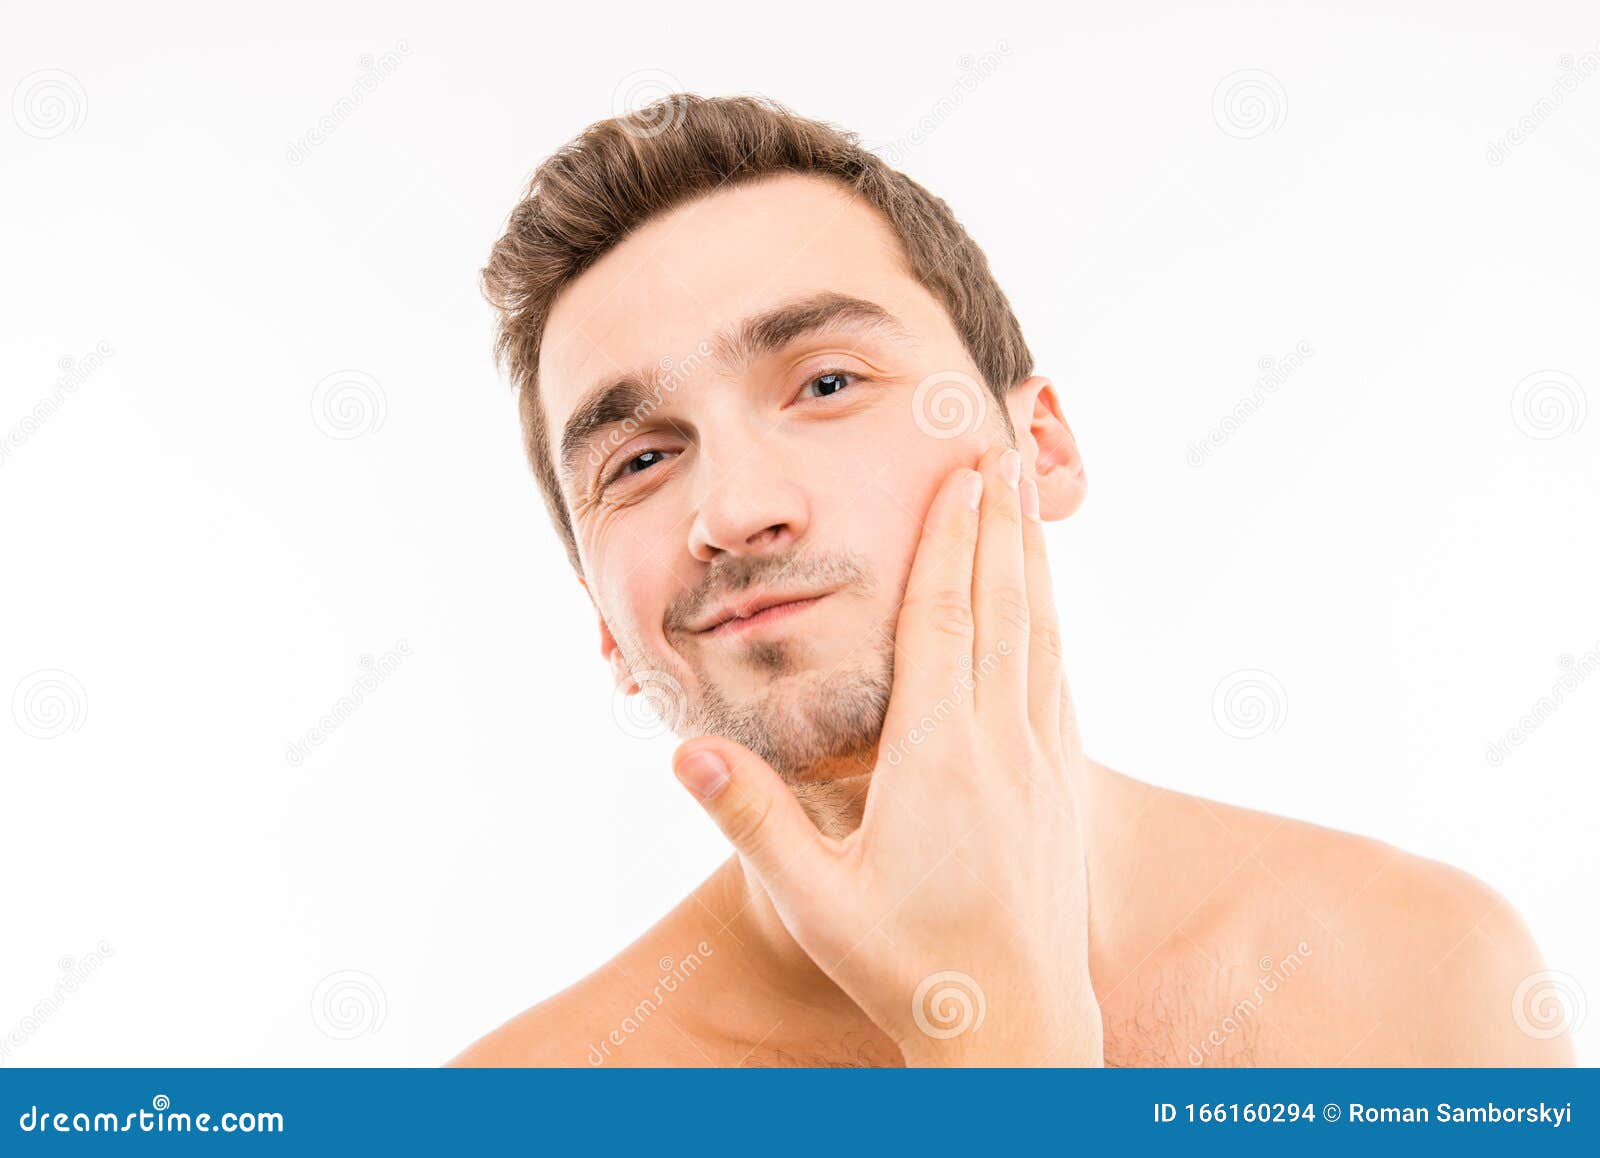 handsome young man touching his face after shave